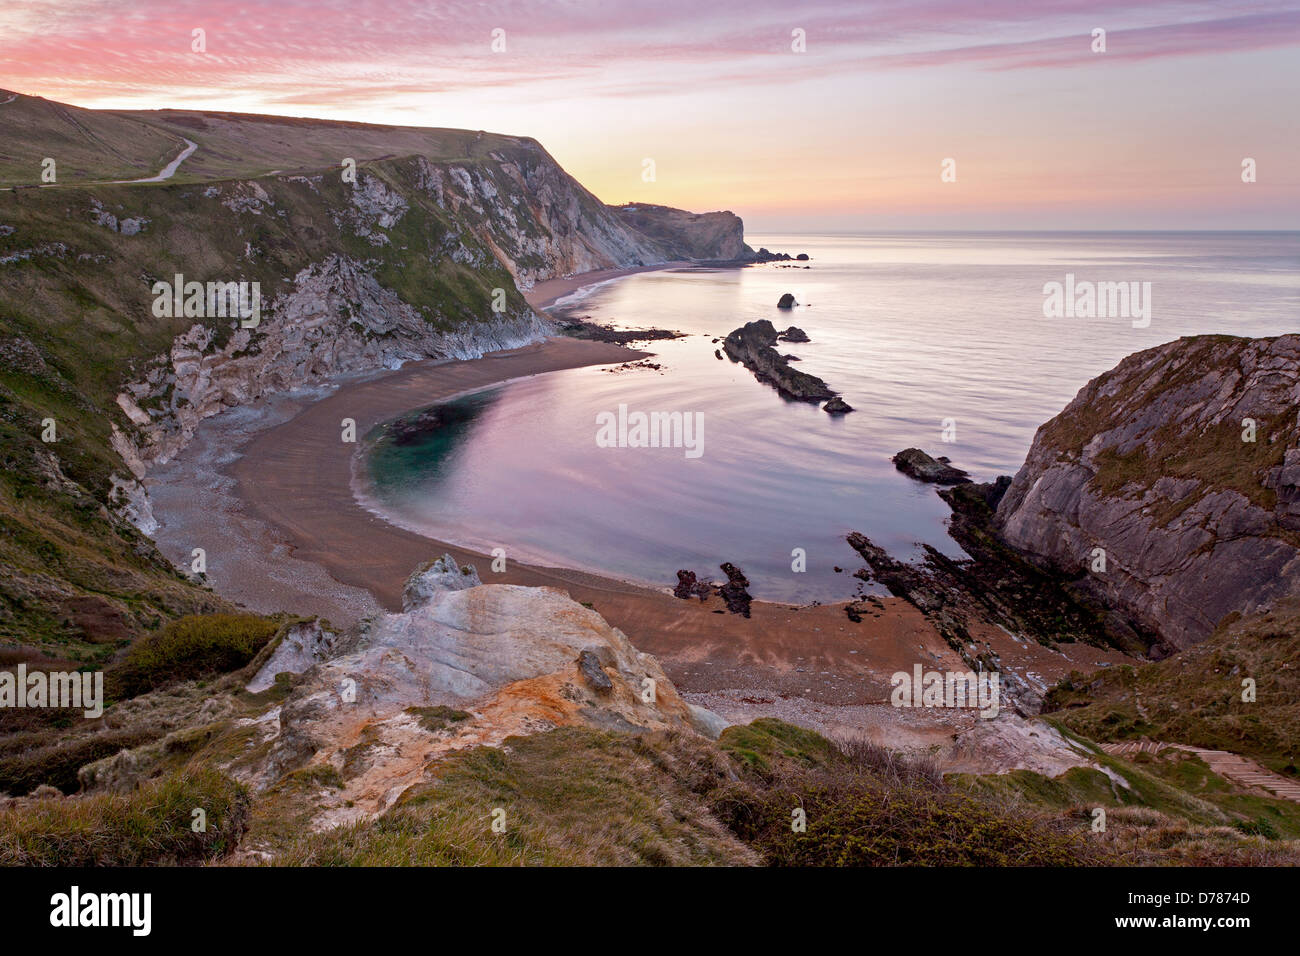 Man O' War cove in St Oswalds Bay near to Durdle Door on the World Heritage coast in Dorset, England. Stock Photo